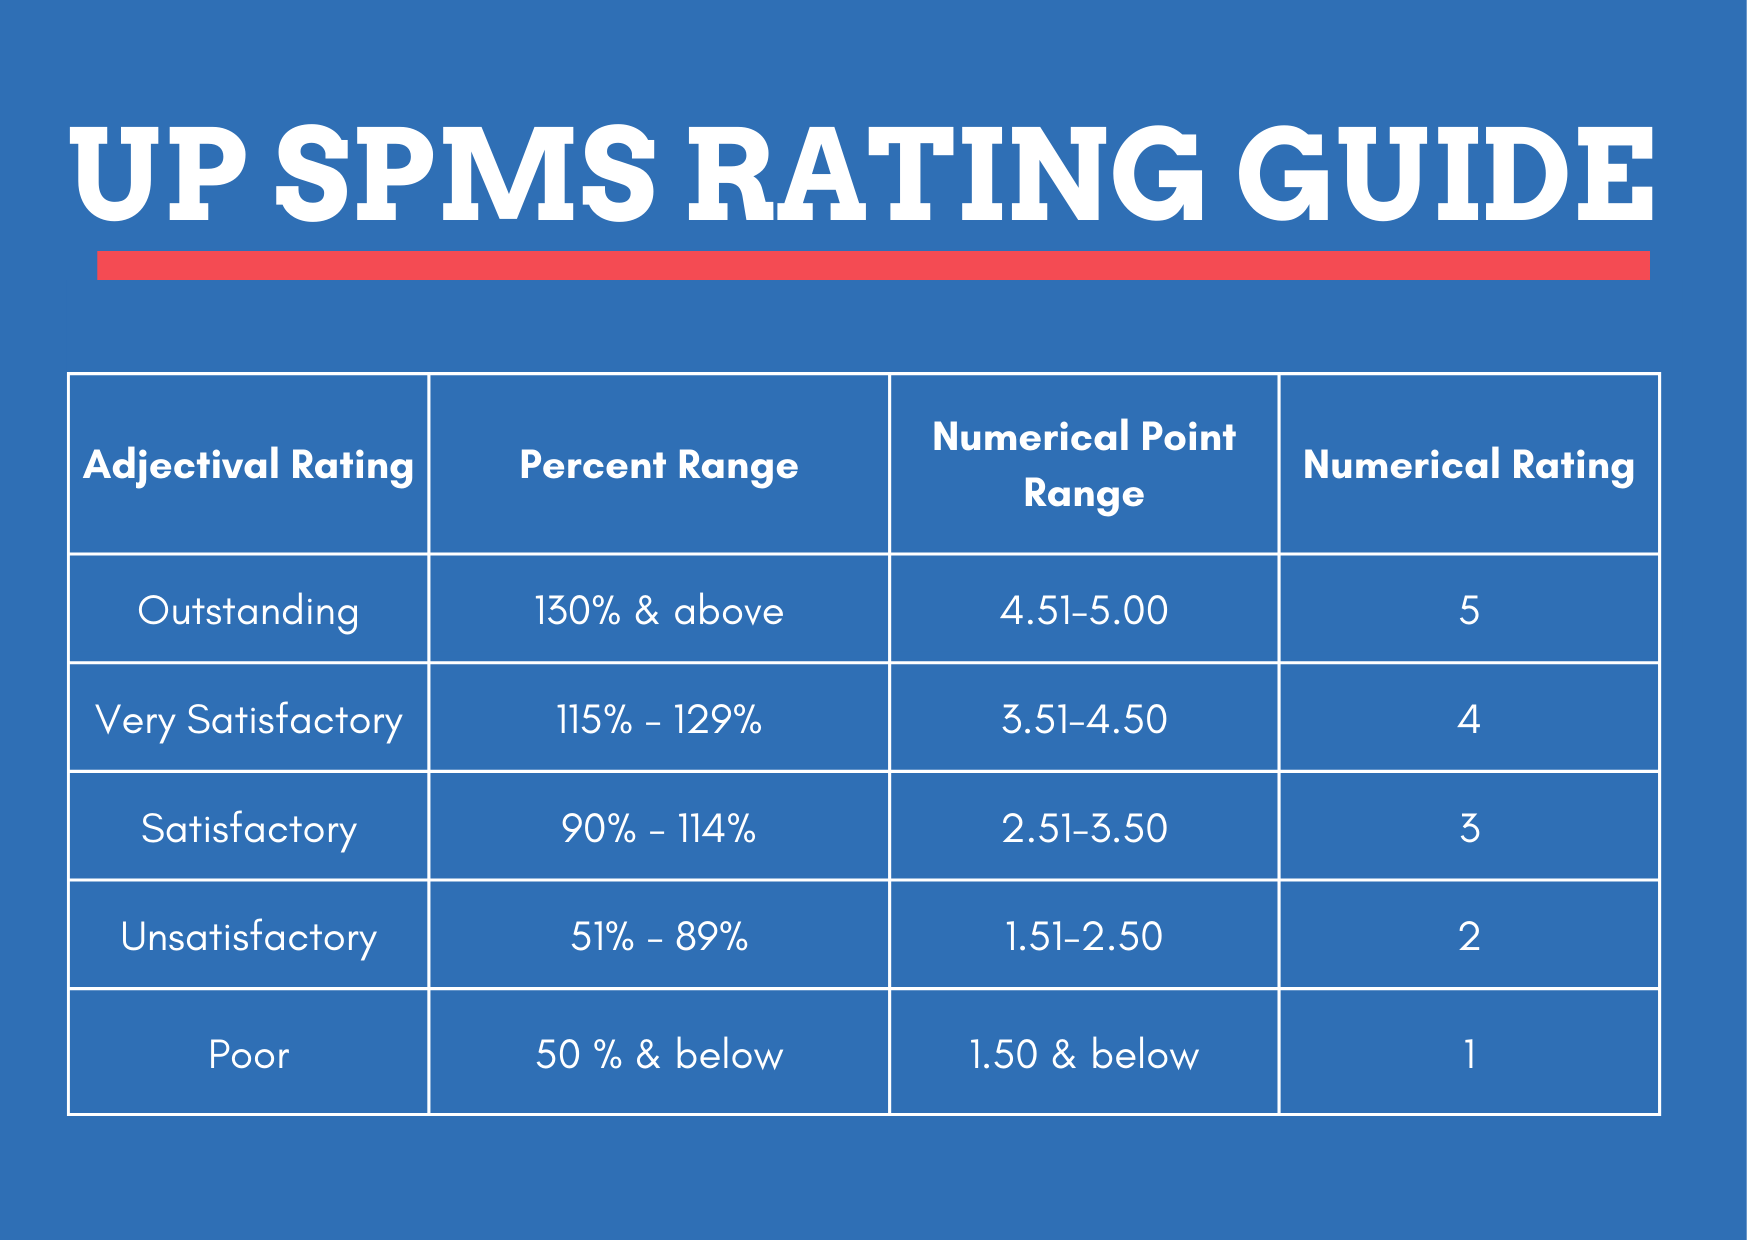 UP SPMS Rating Guide